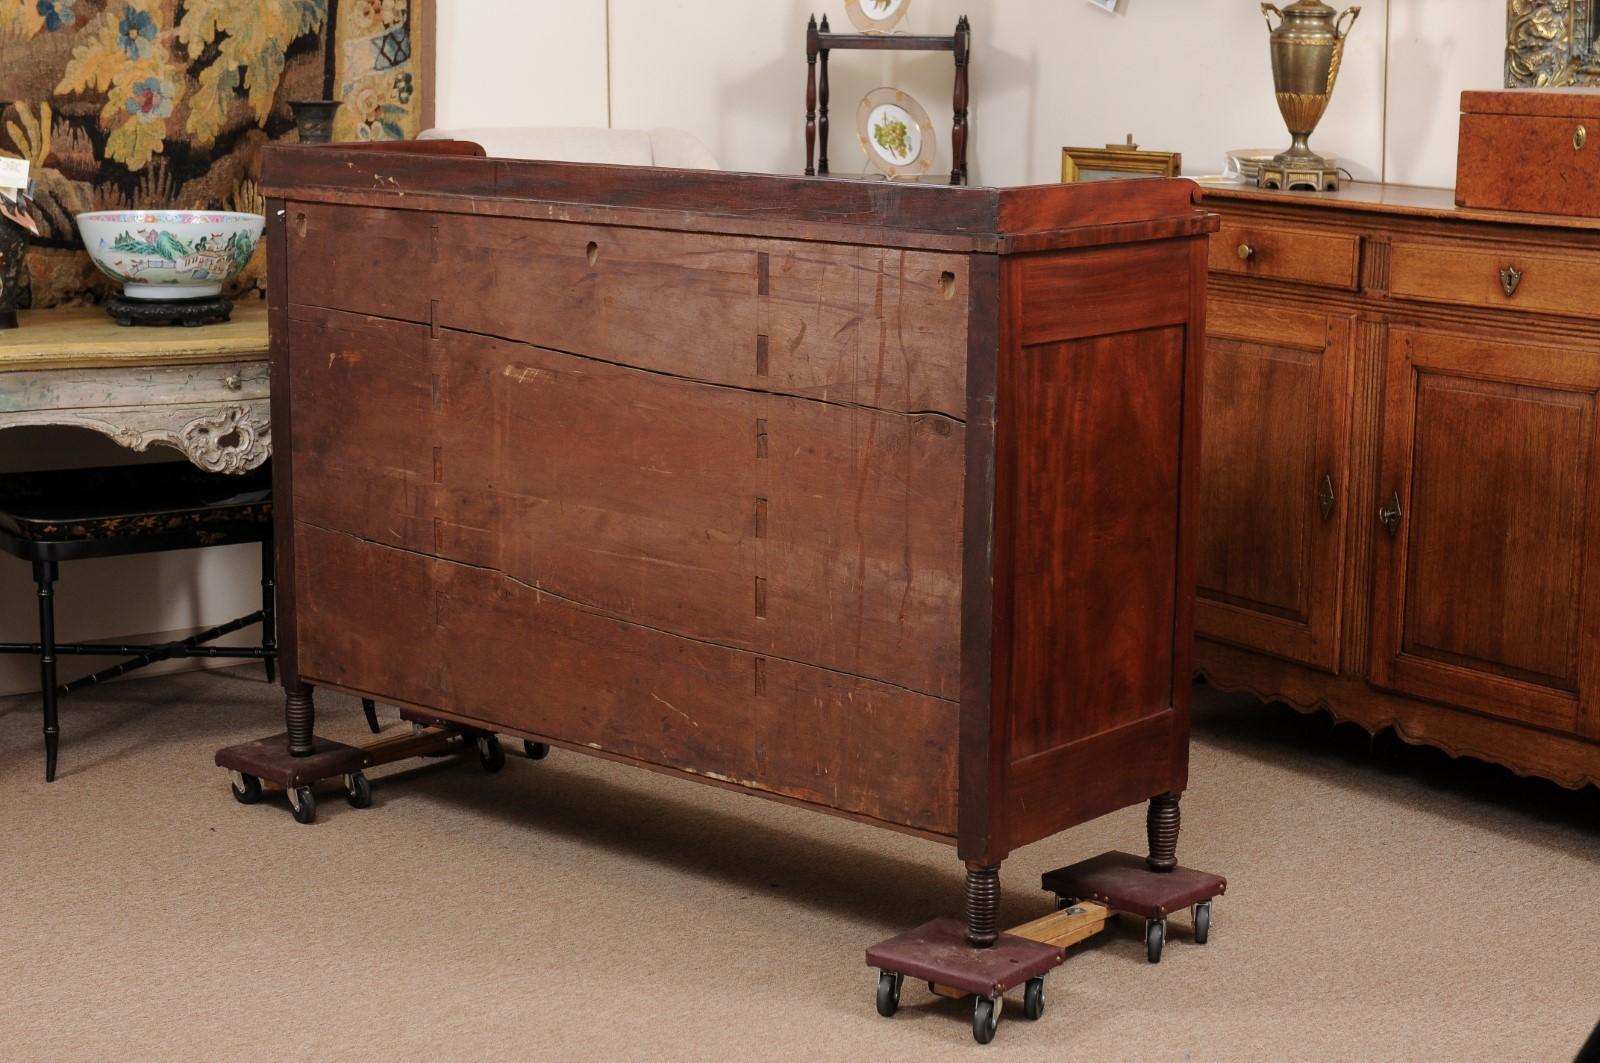 19th Century American Sheraton Sideboard in Mahogany with 4 Cabinet Doors 3